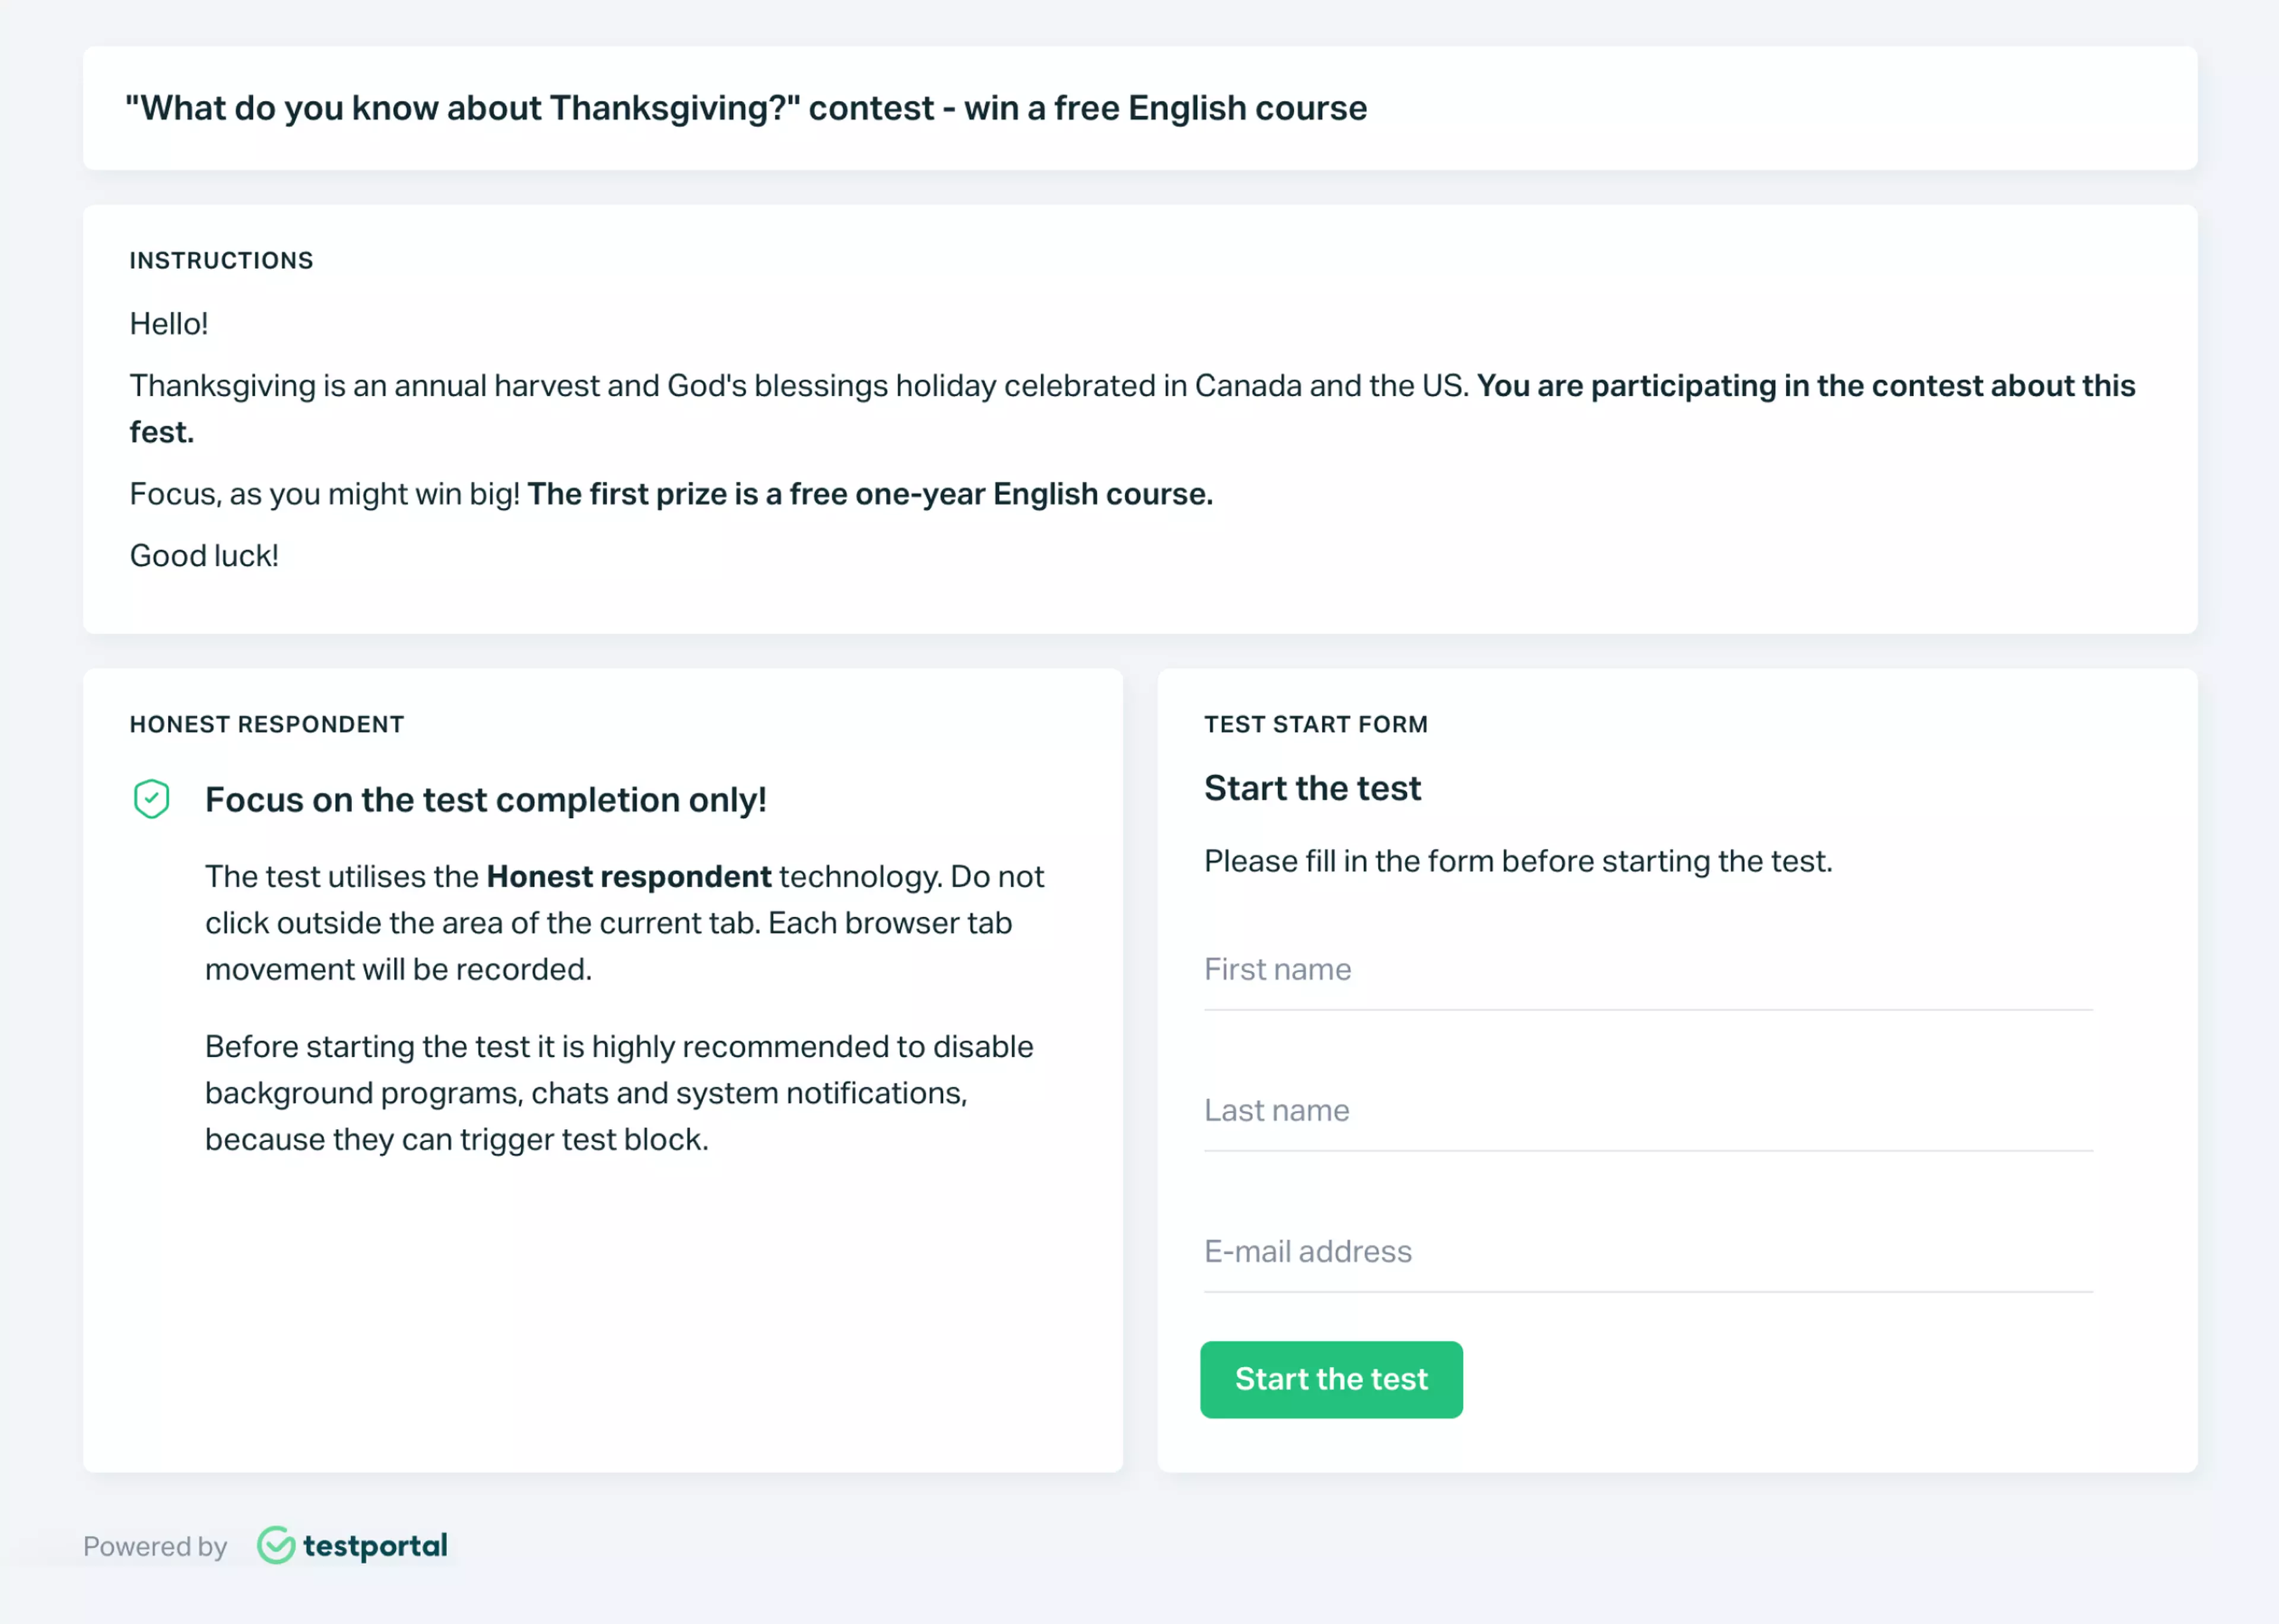 Testportal test start page with respondent instructions and a test start form.